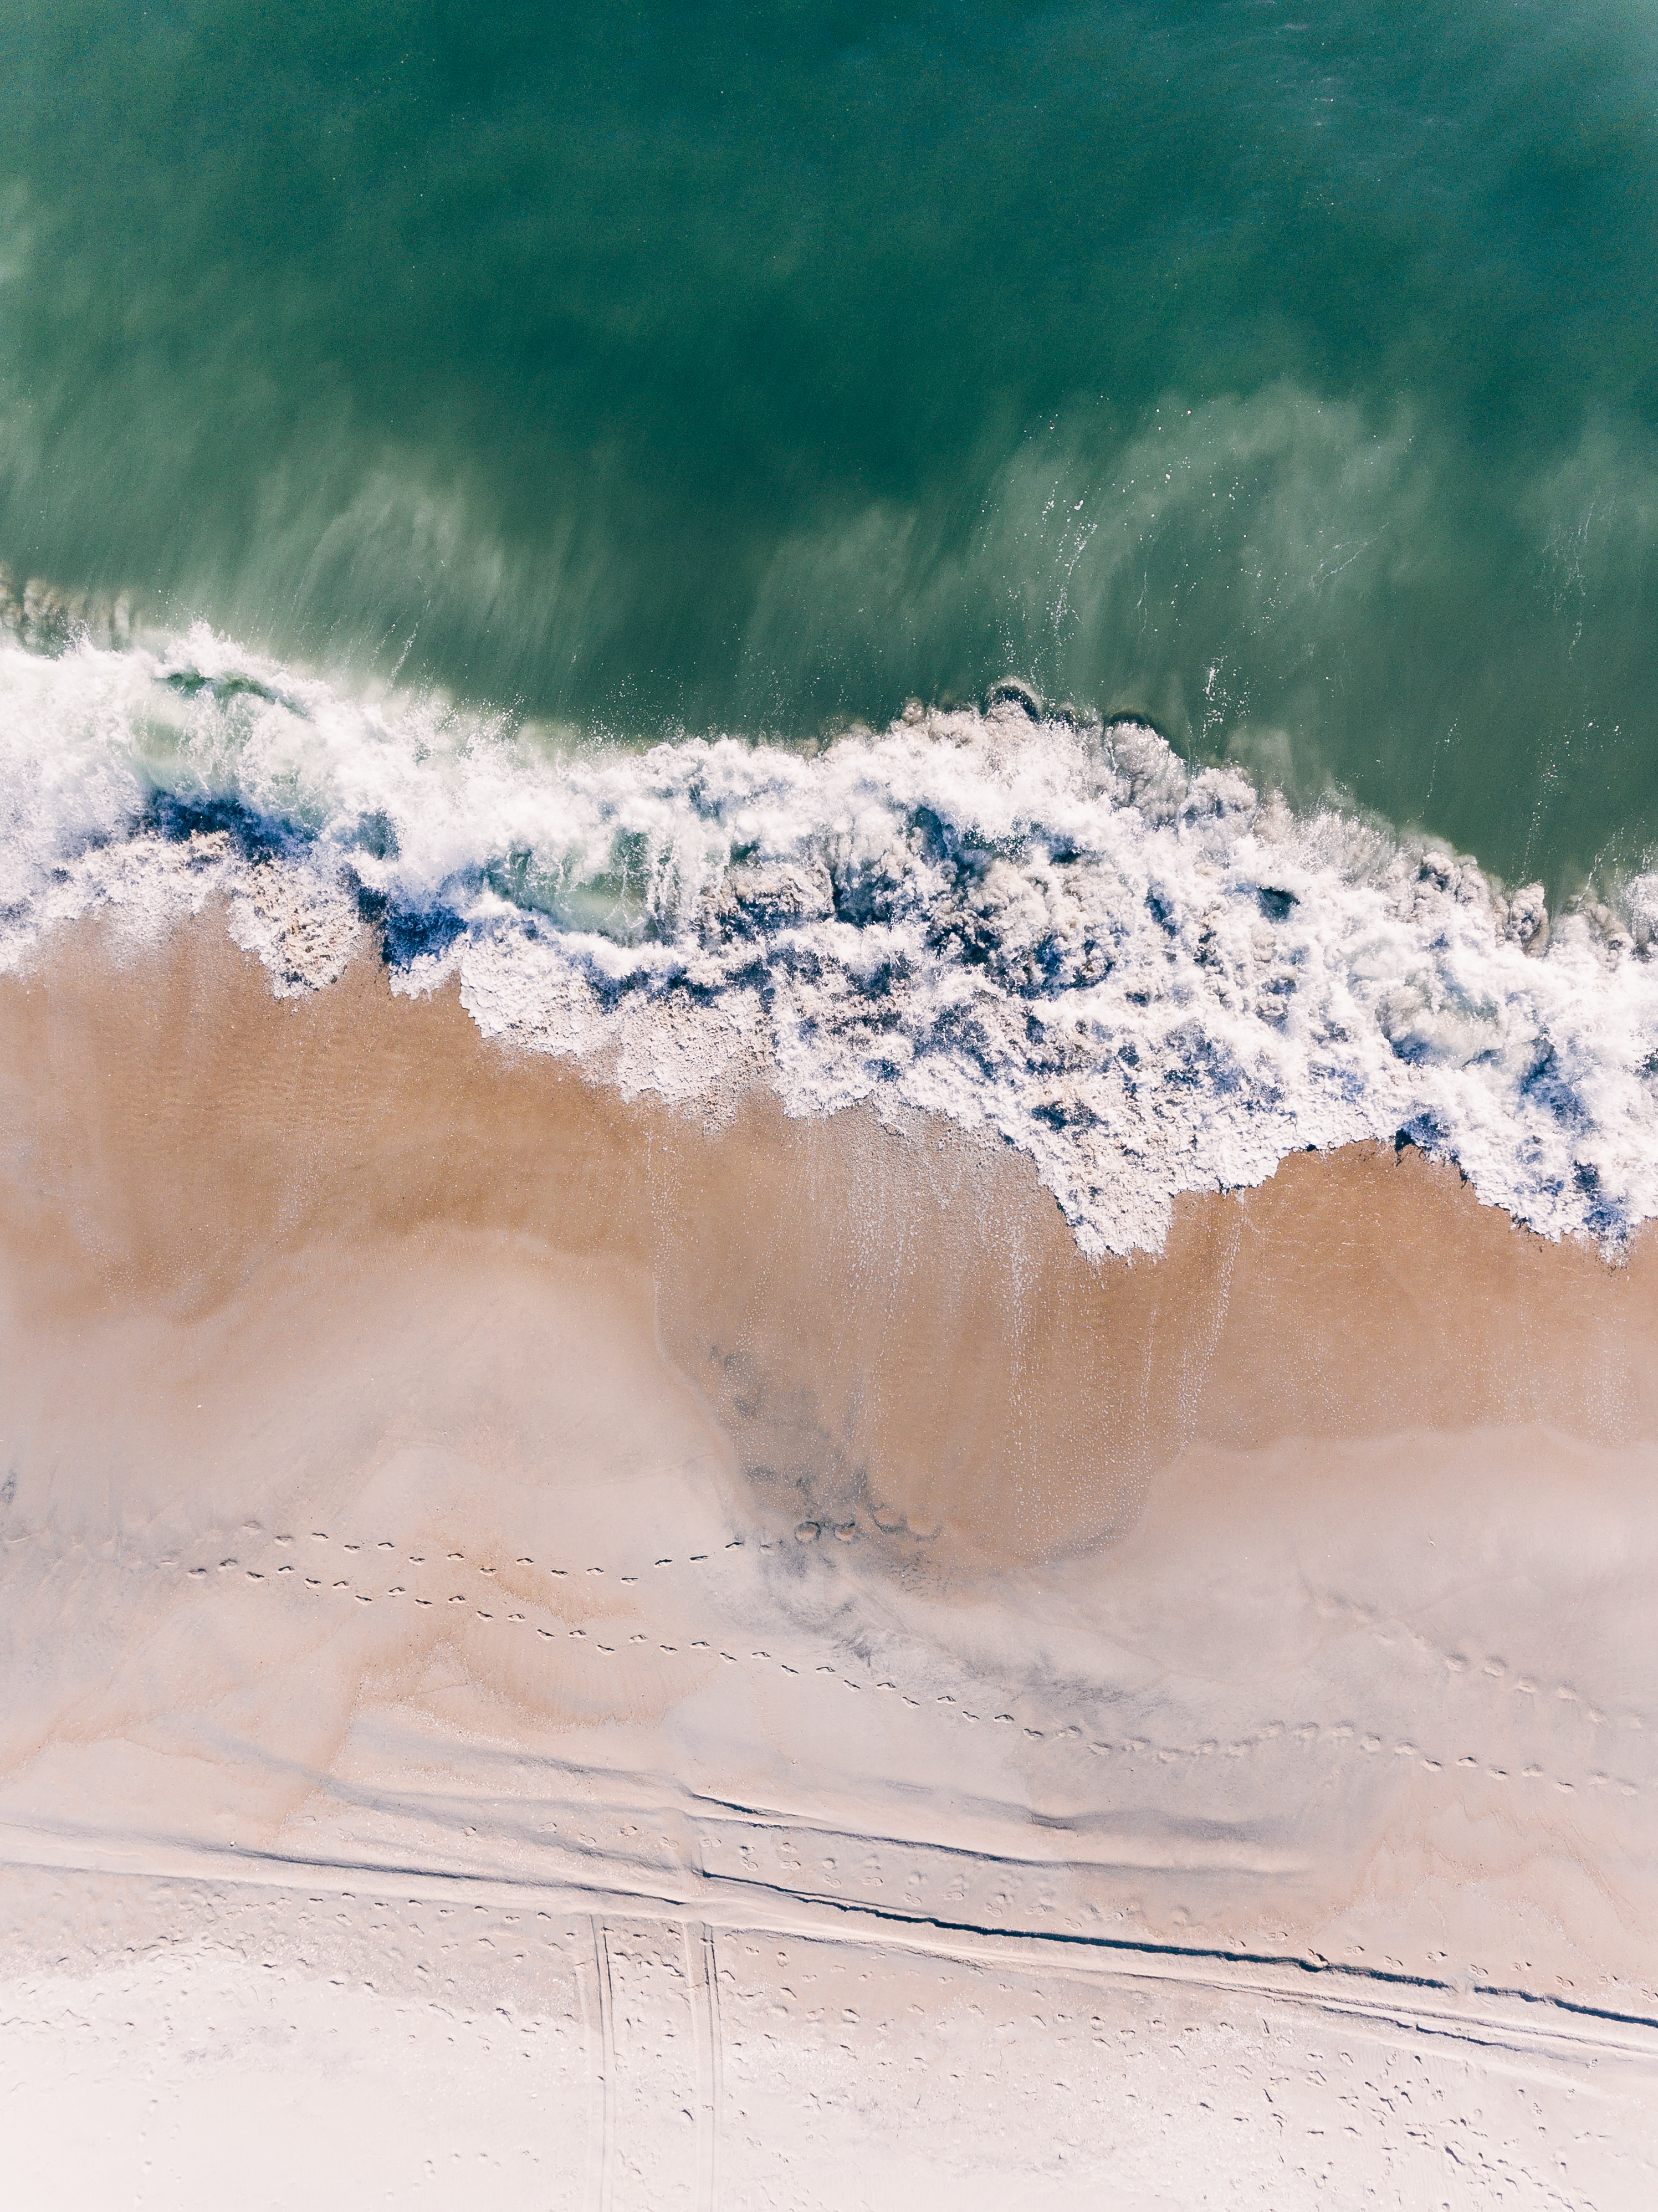 android nature, surf, sand, view from above, ocean, wave